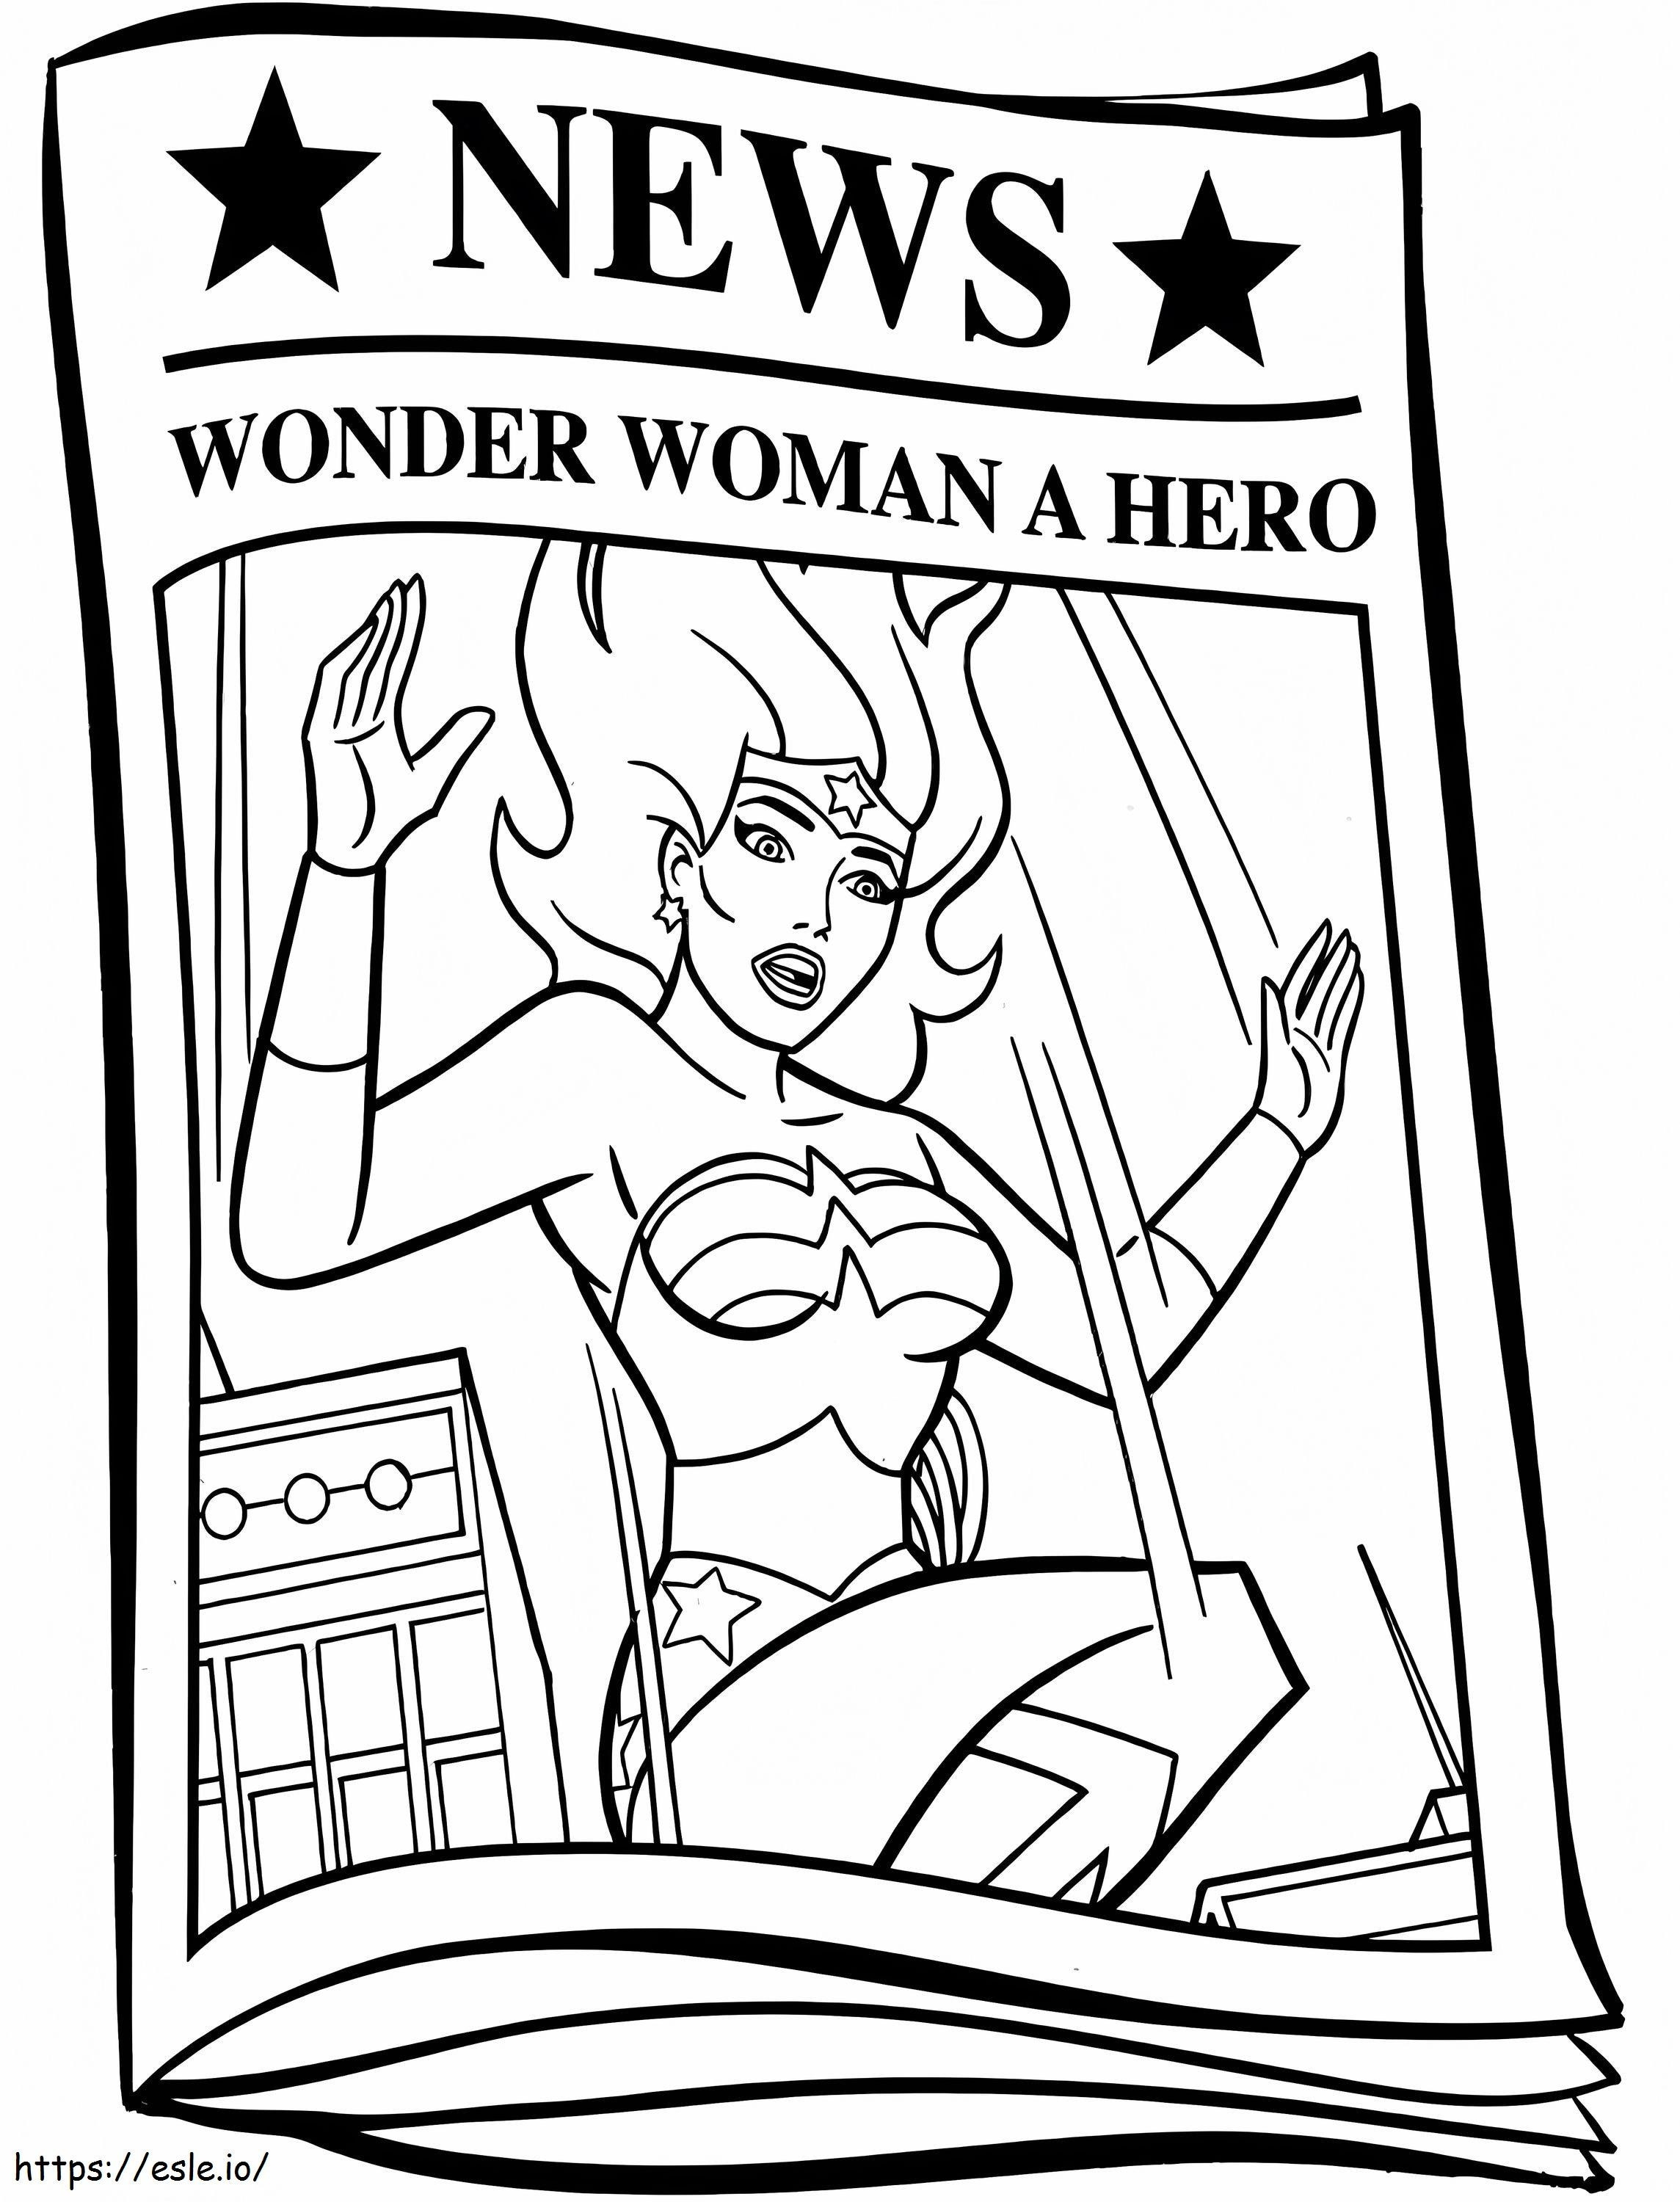 News About Wonder Woman A4 coloring page